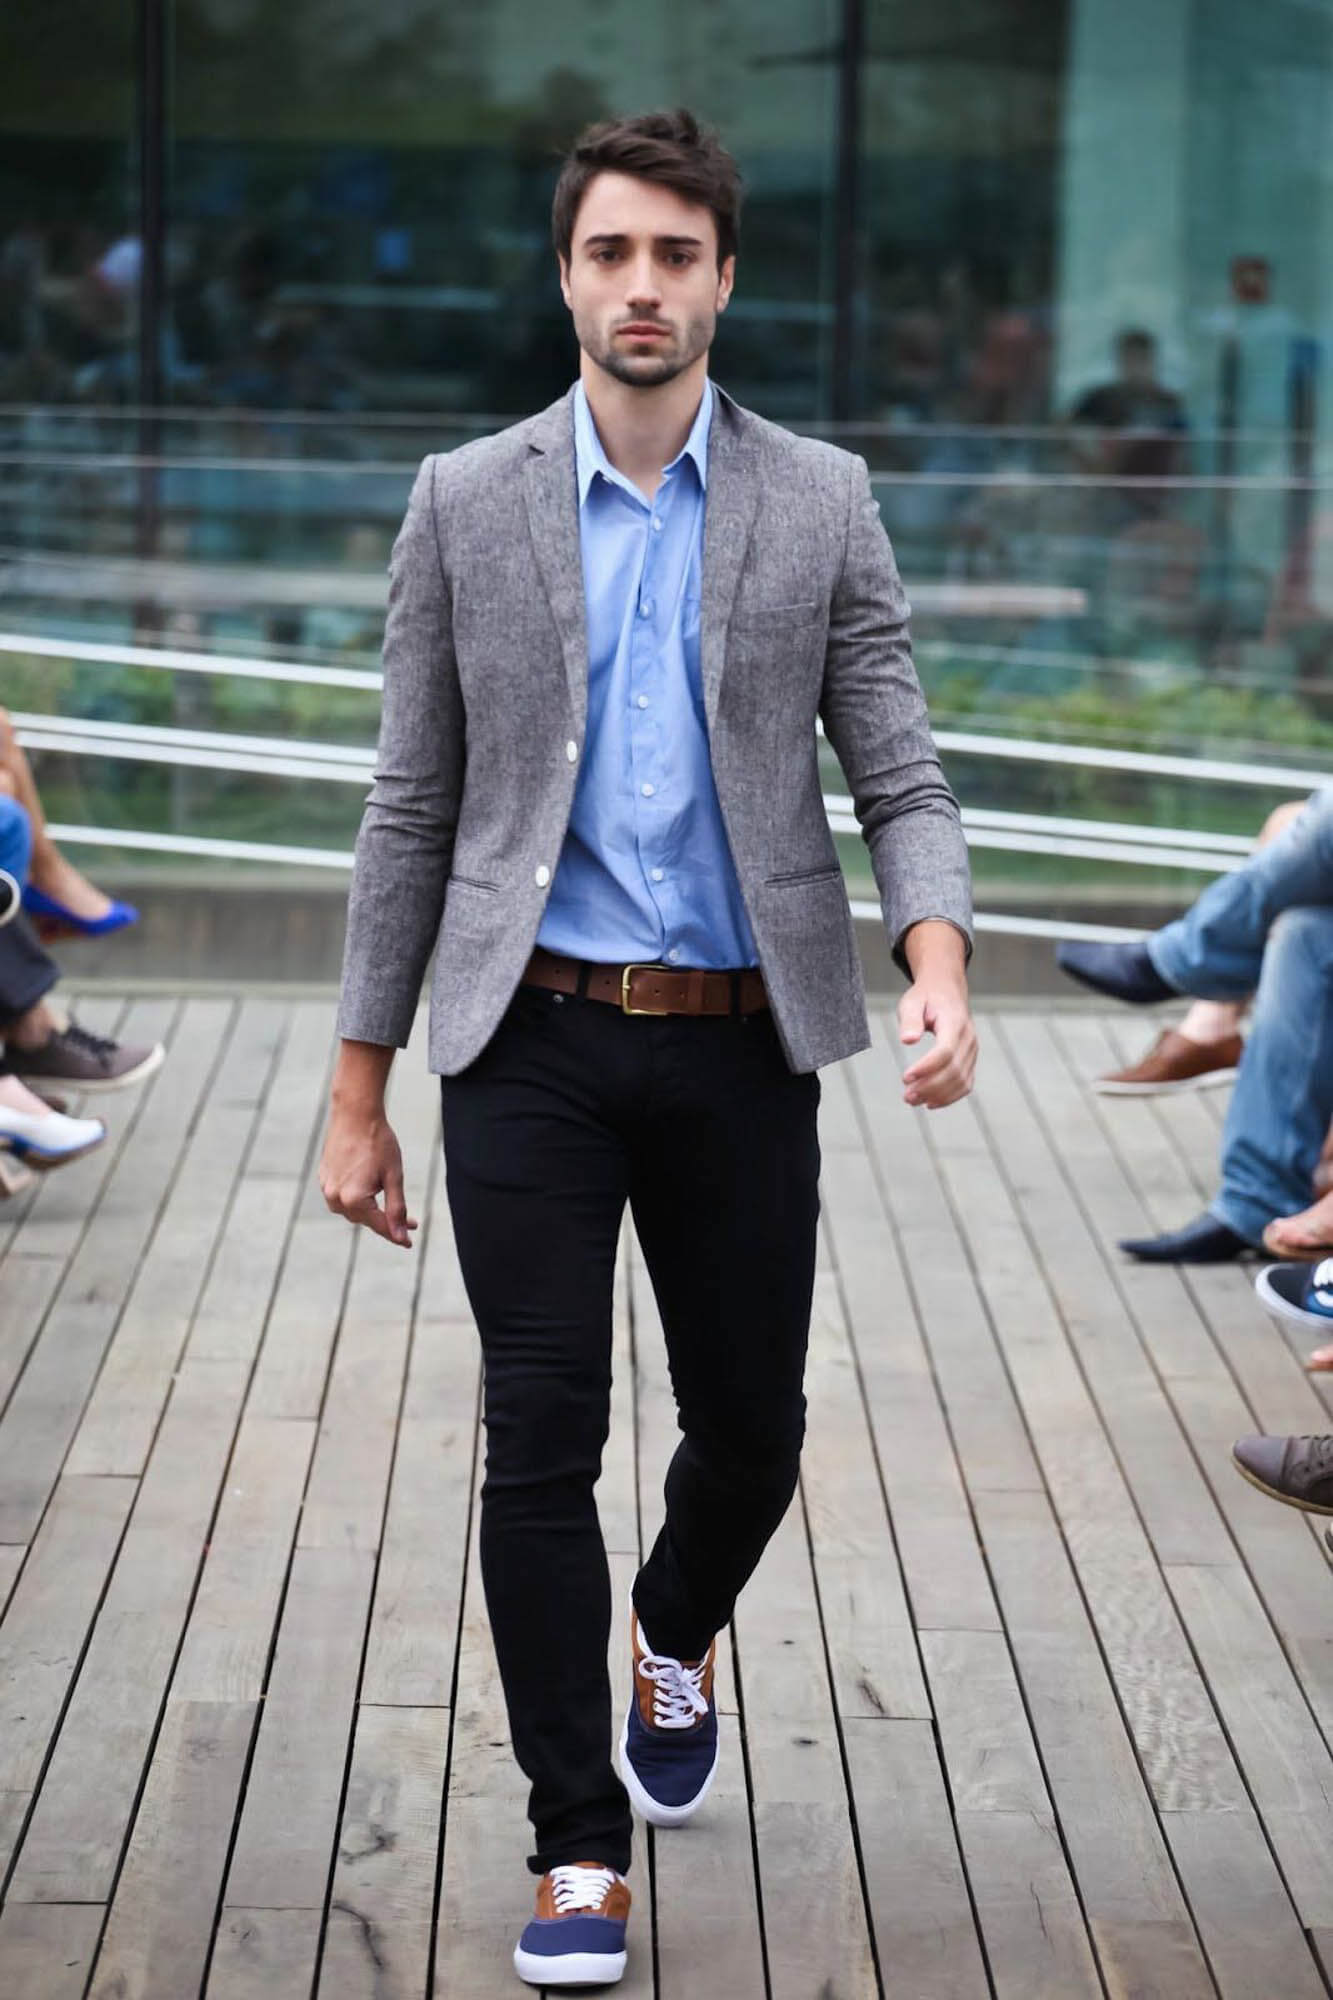 Business Casual Fashion for Men